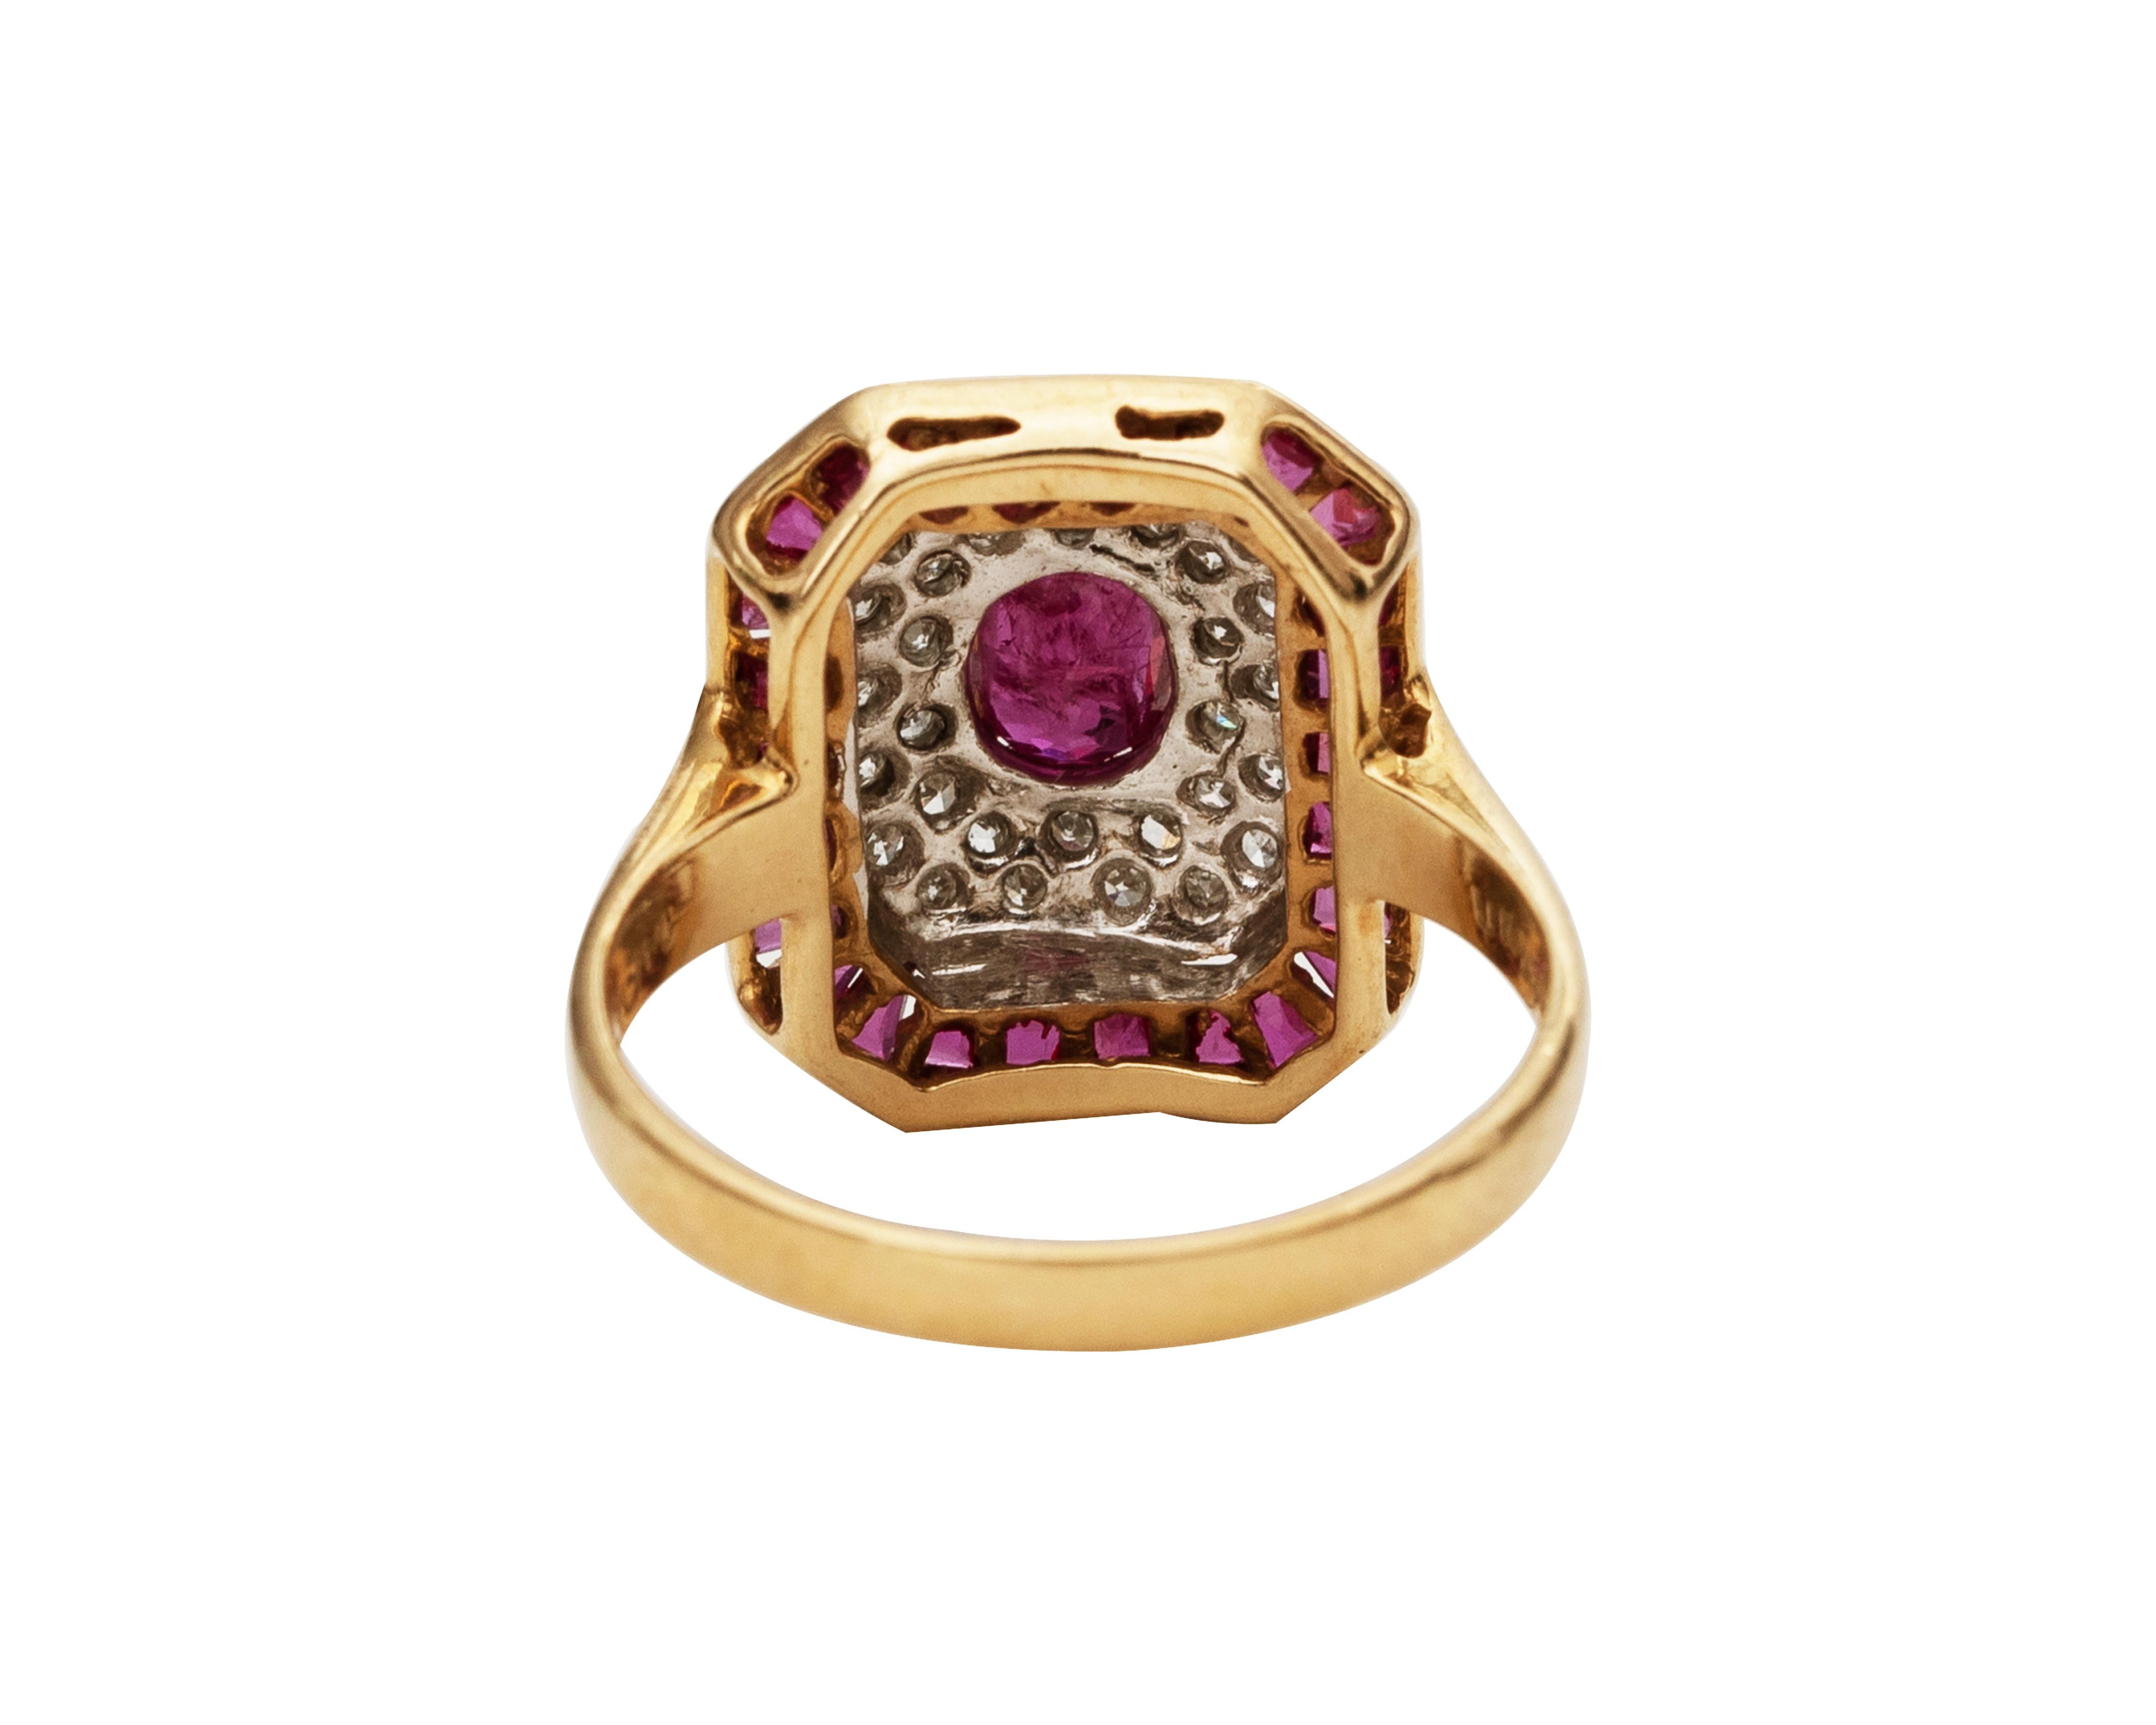 Retro 1.4 Carat Total Ruby and Diamond Ring, 14 Karat Gold For Sale